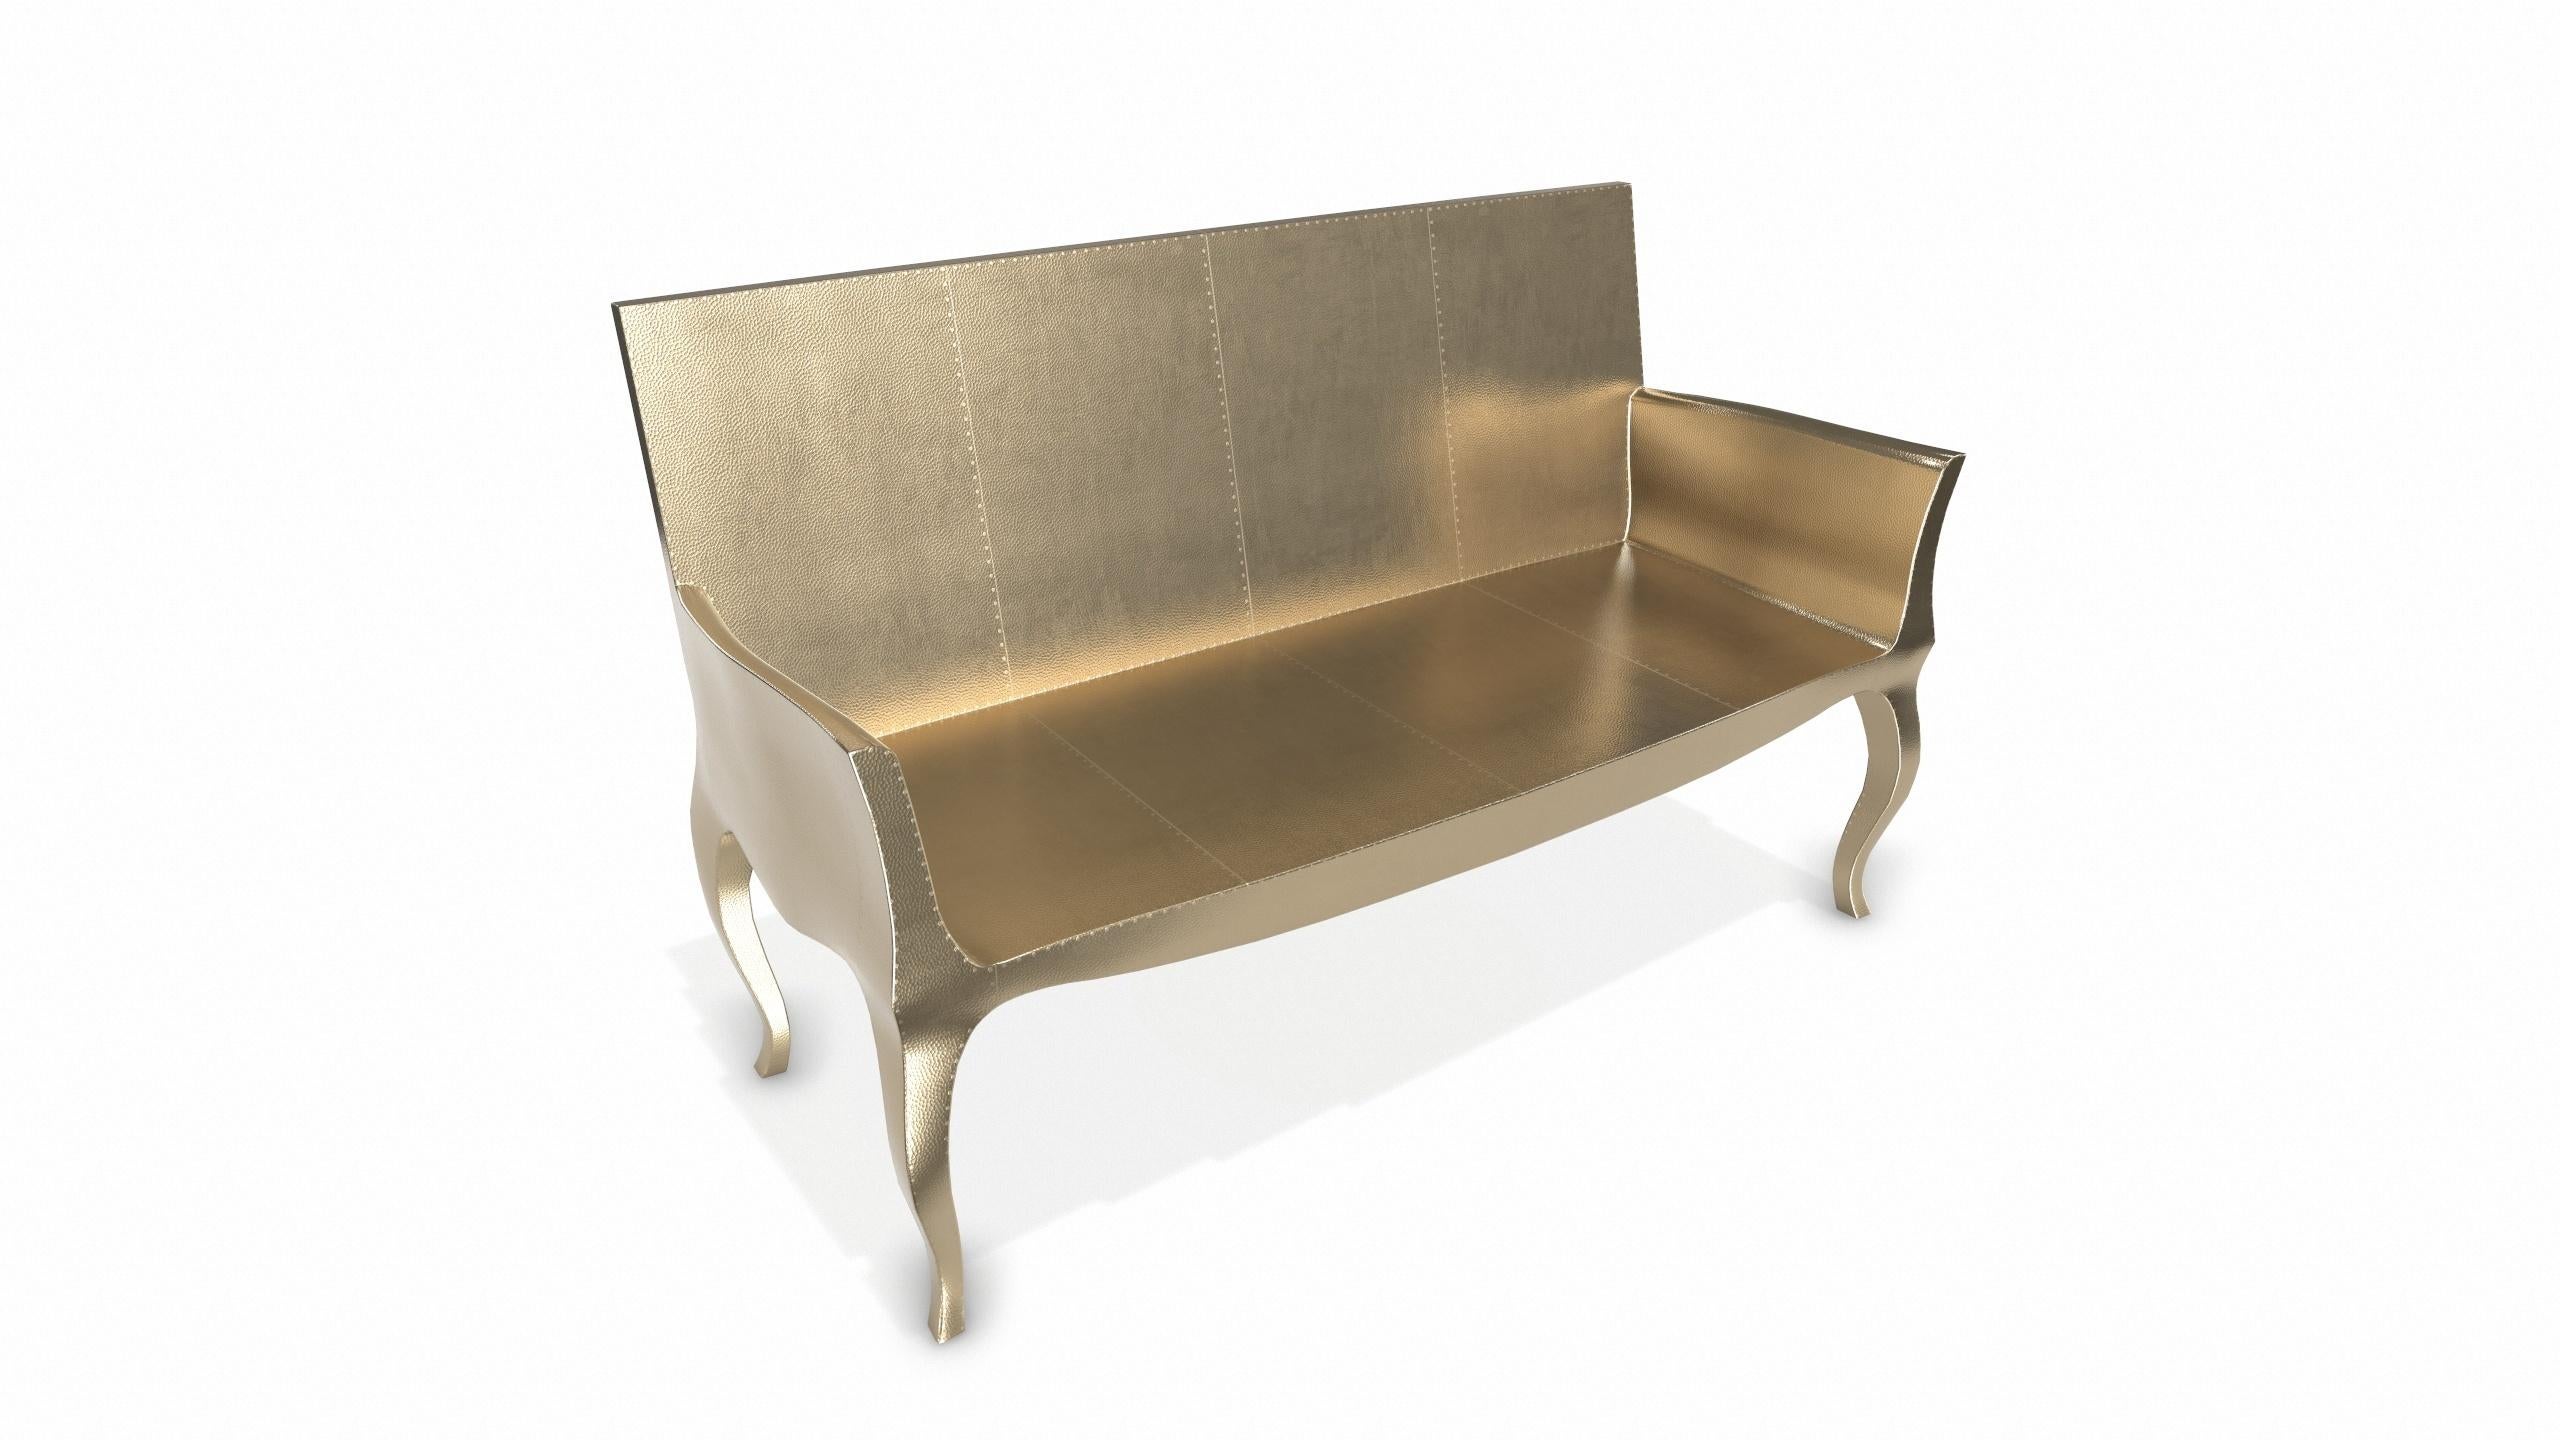 Louise Settee Art Deco Settees in Mid. Hammered Brass by Paul Mathieu For Sale 2